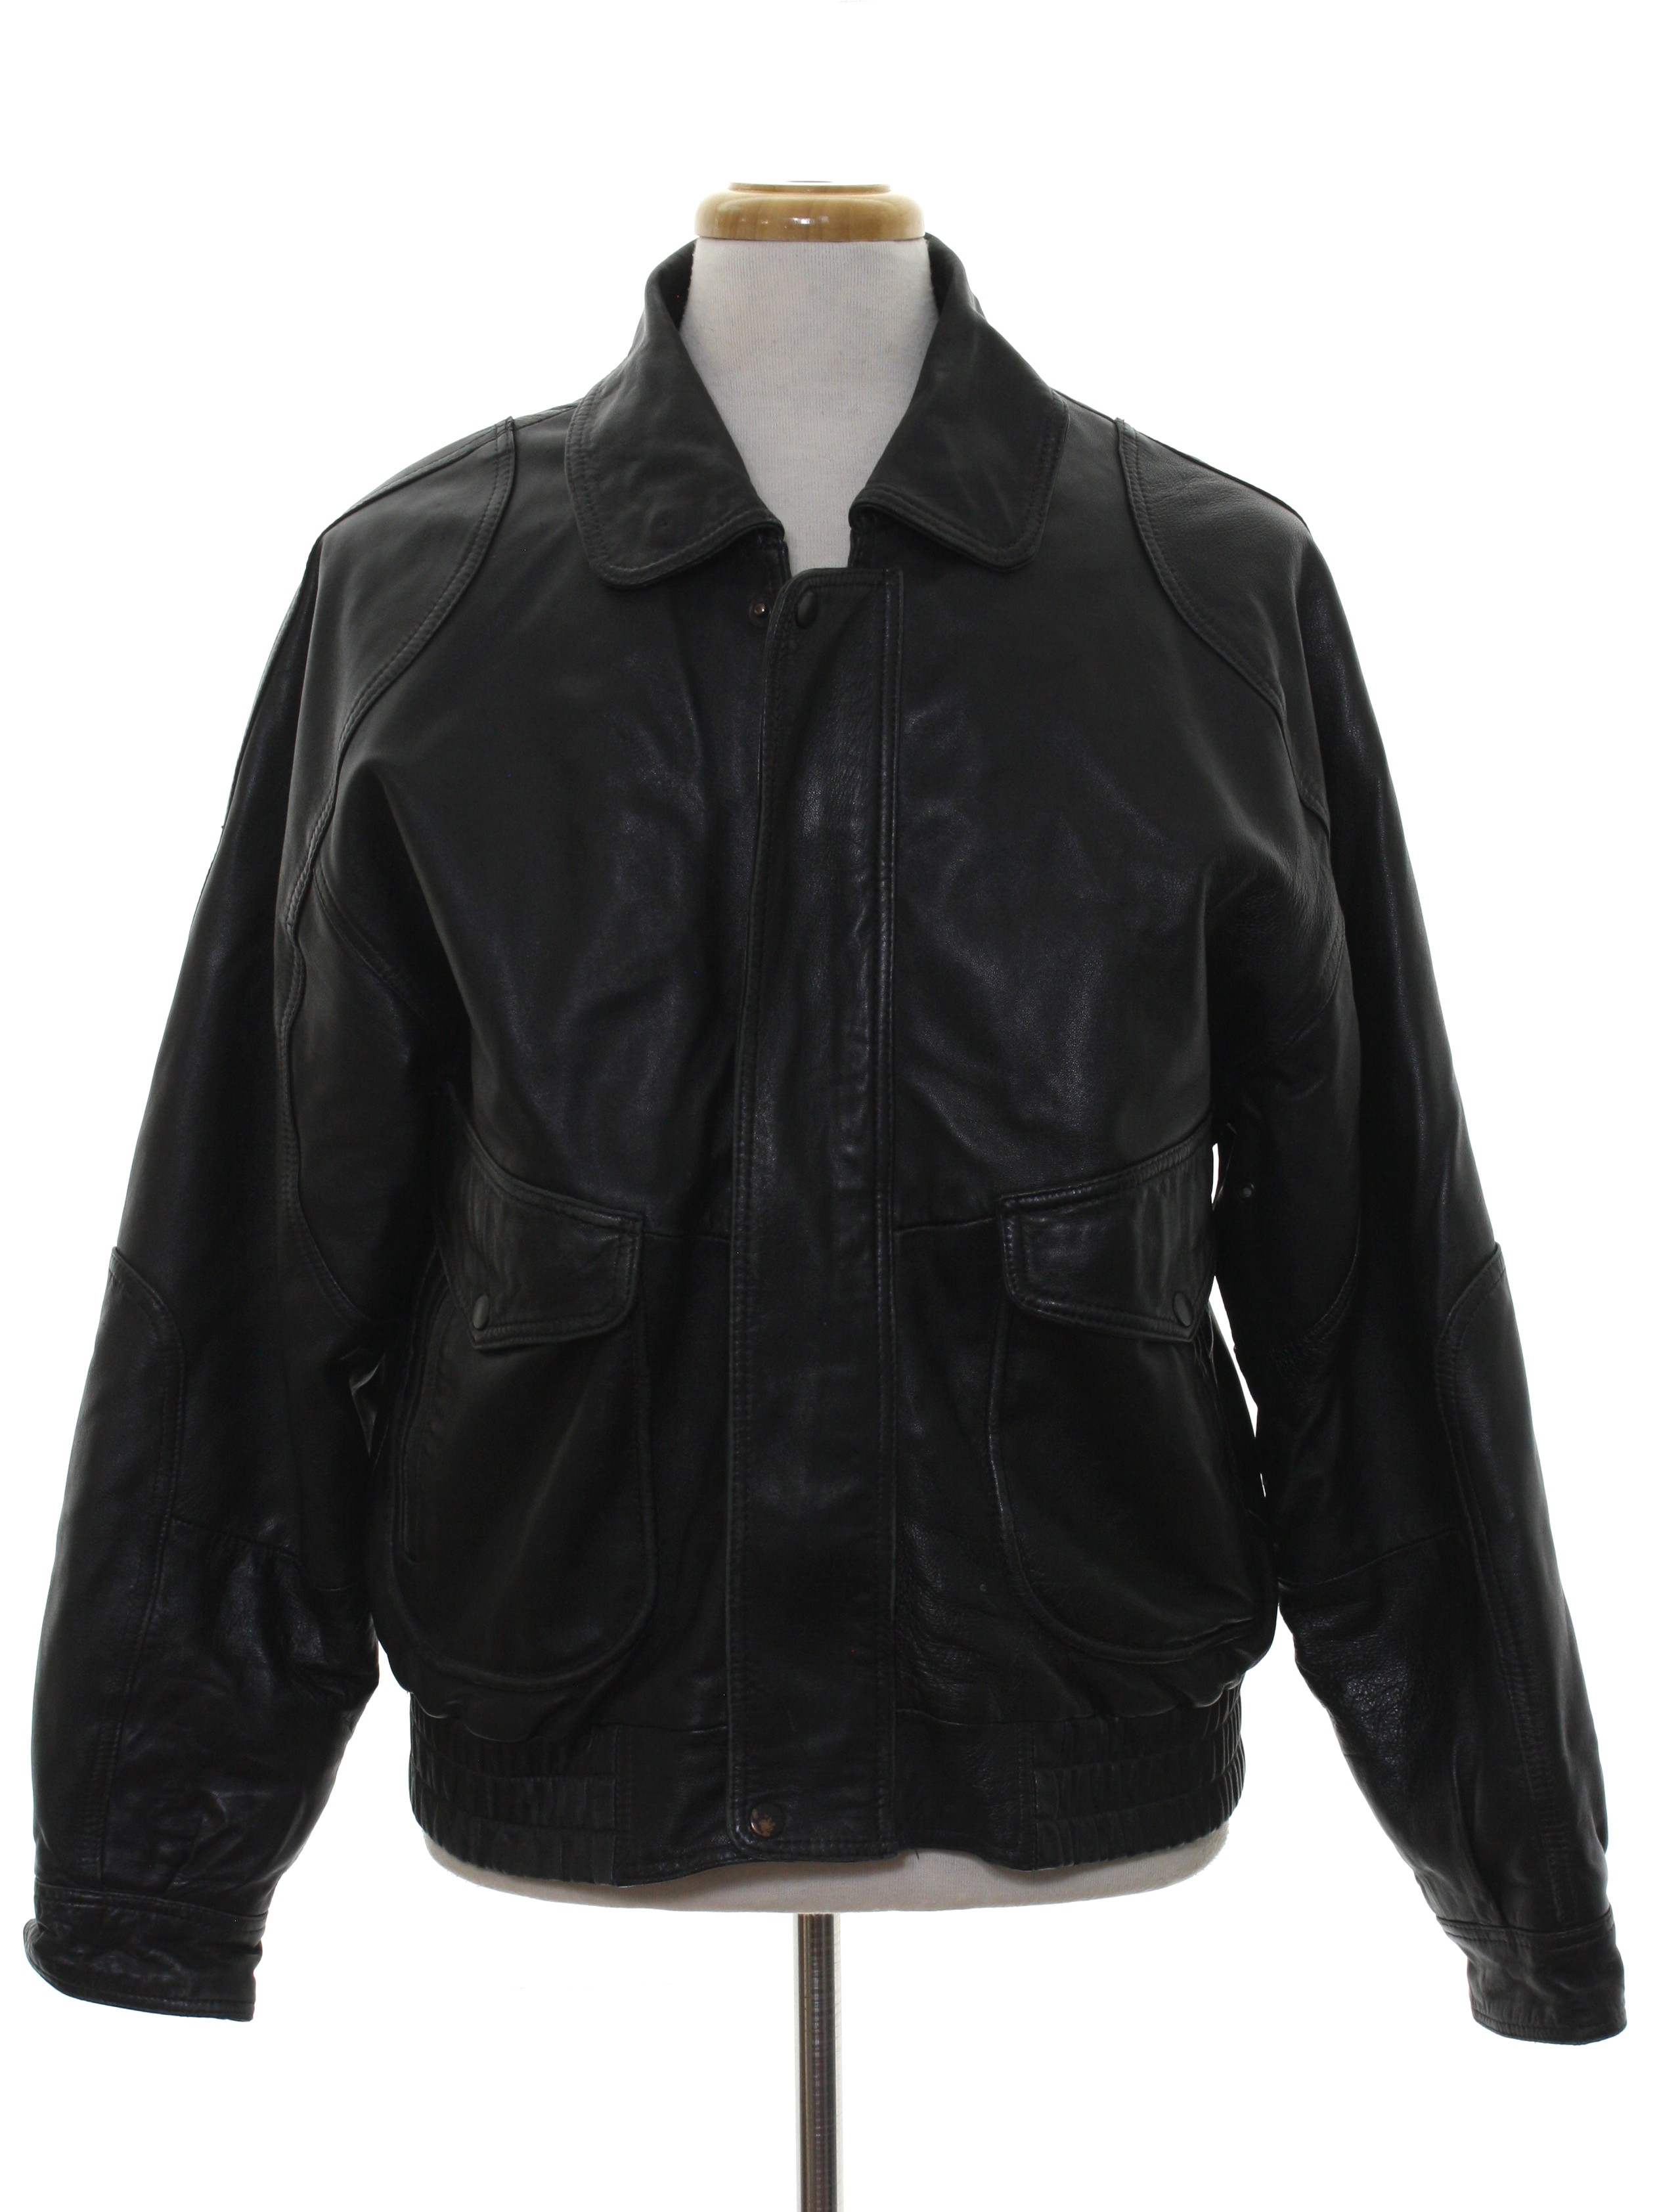 Retro 1980s Leather Jacket: 80s -New Zealand Outback- Mens black ...